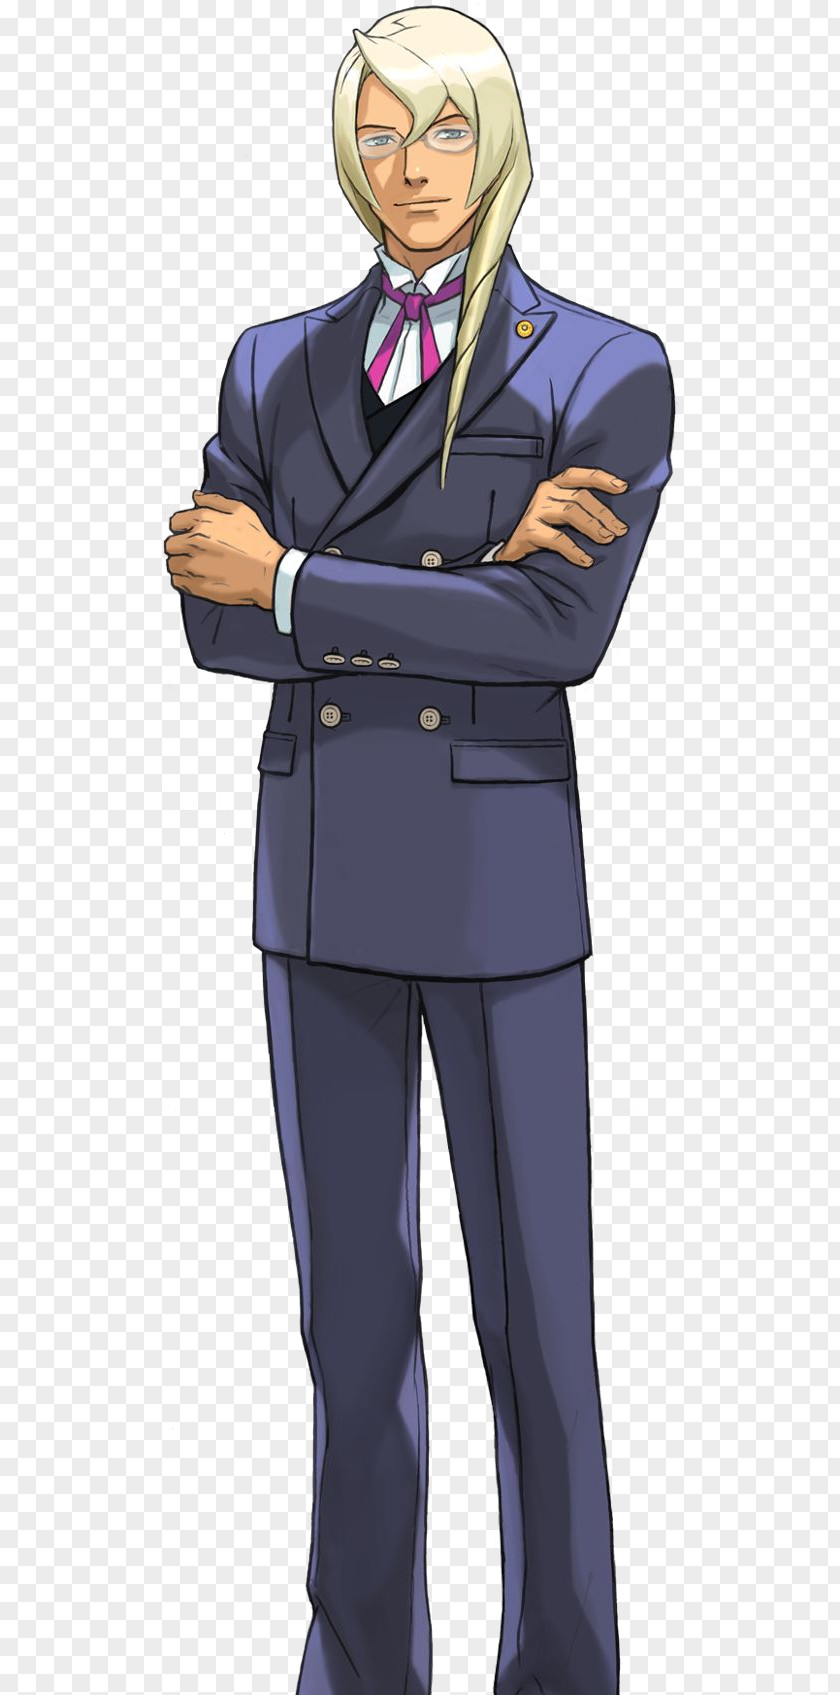 Chalk Effect Apollo Justice: Ace Attorney Phoenix Wright: 6 Video Game PNG